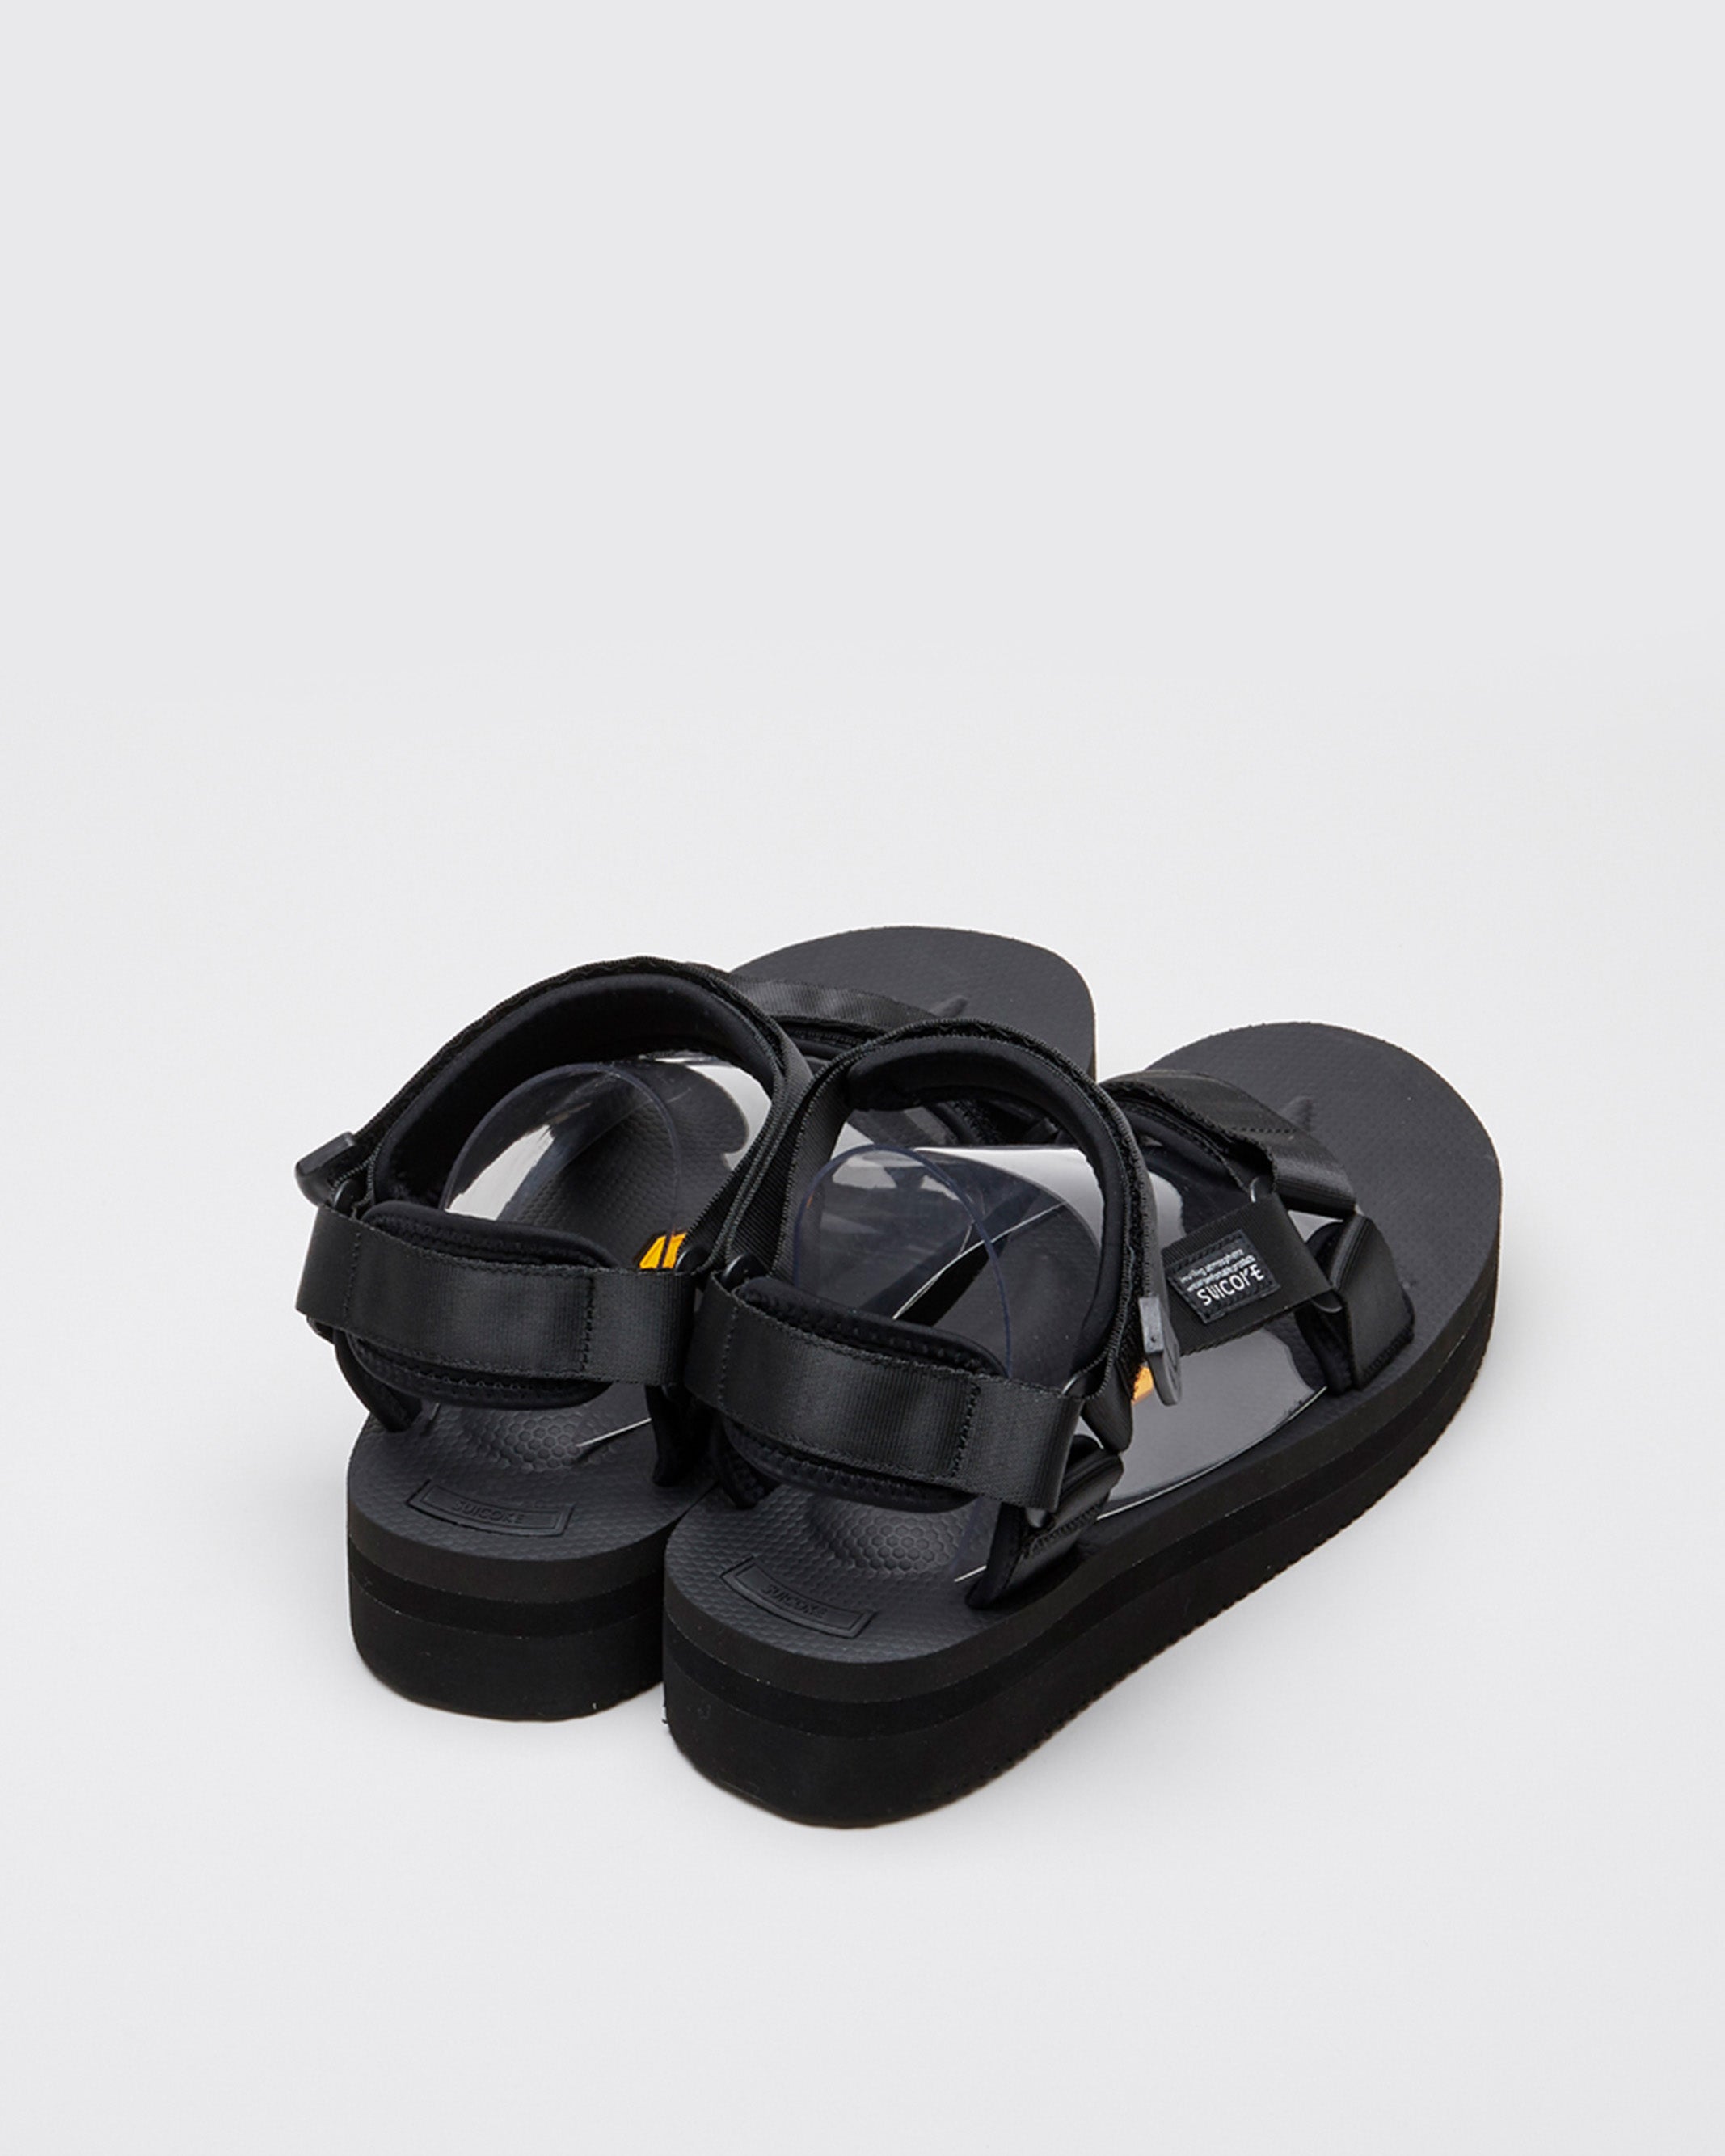 SUICOKE DEPA-V2PO in Black OG-022V2PO | Shop from eightywingold an official brand partner for SUICOKE Canada and US.